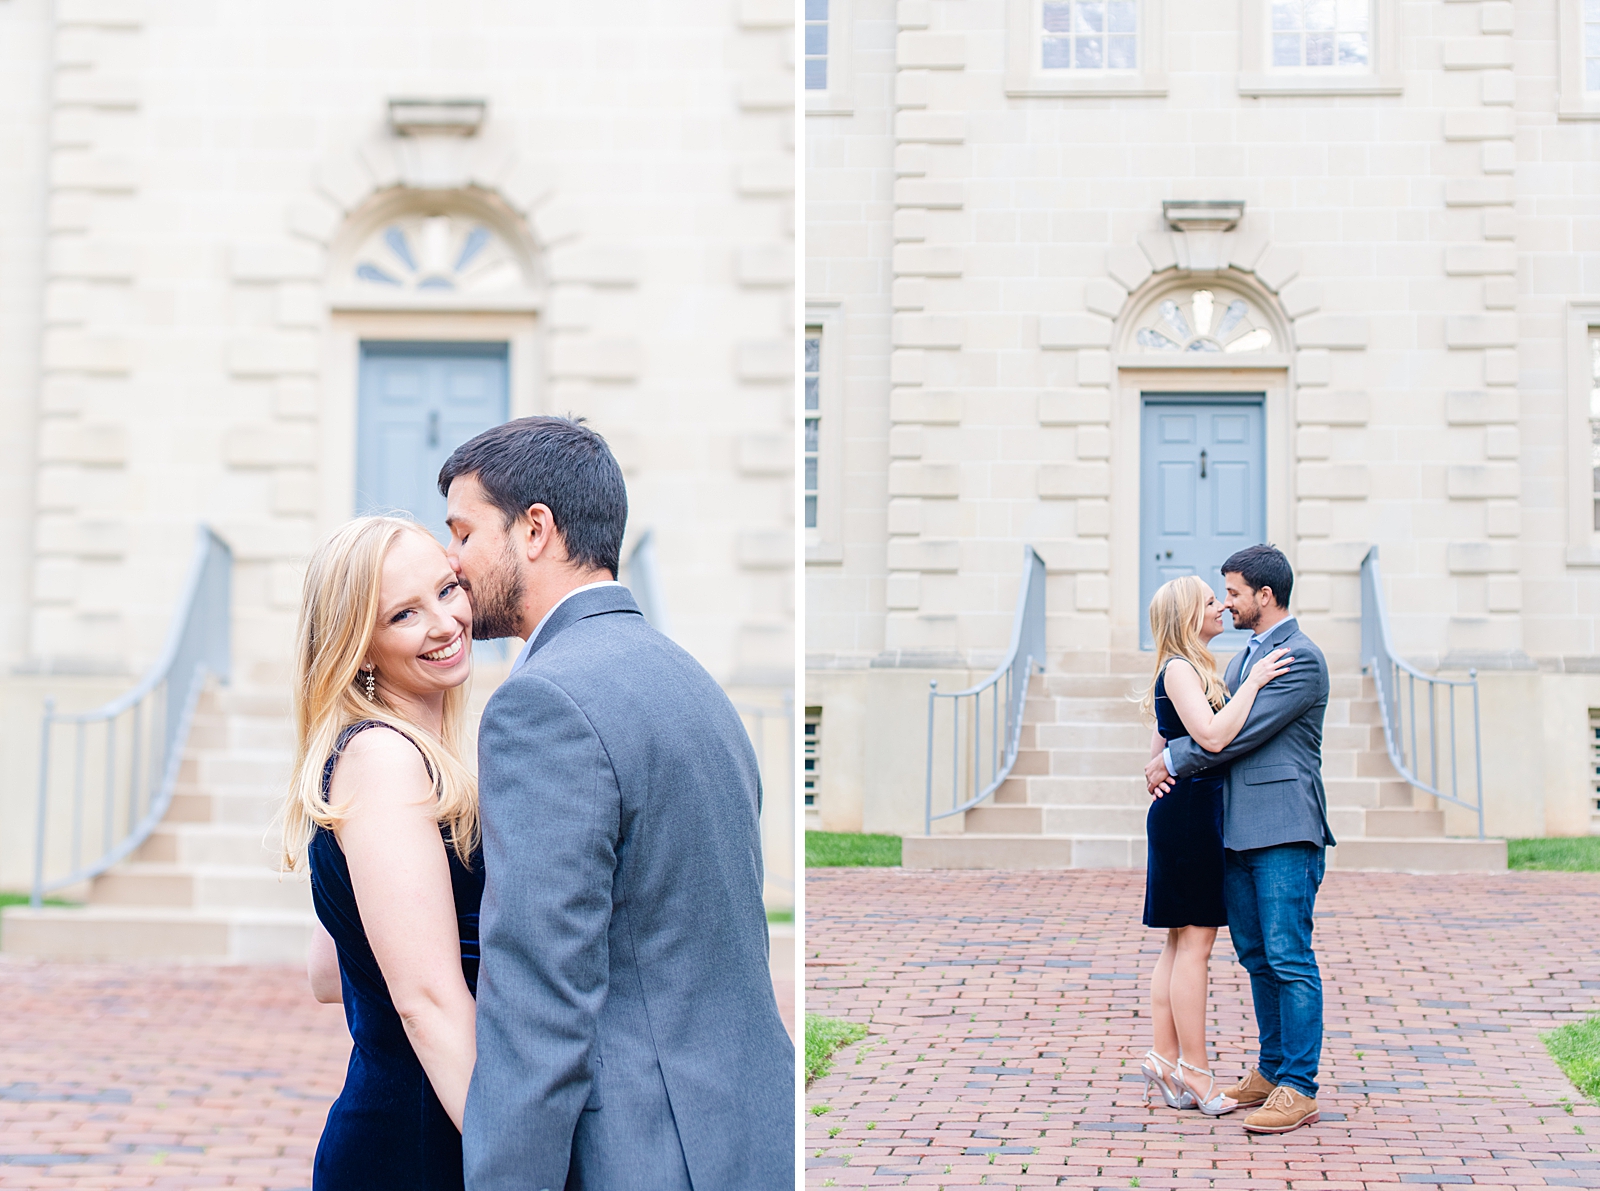 Carlyle House Wedding Photographer Carlyle House Wedding Carlyle House Photography by Manali Photography Old Town Alexandria Wedding